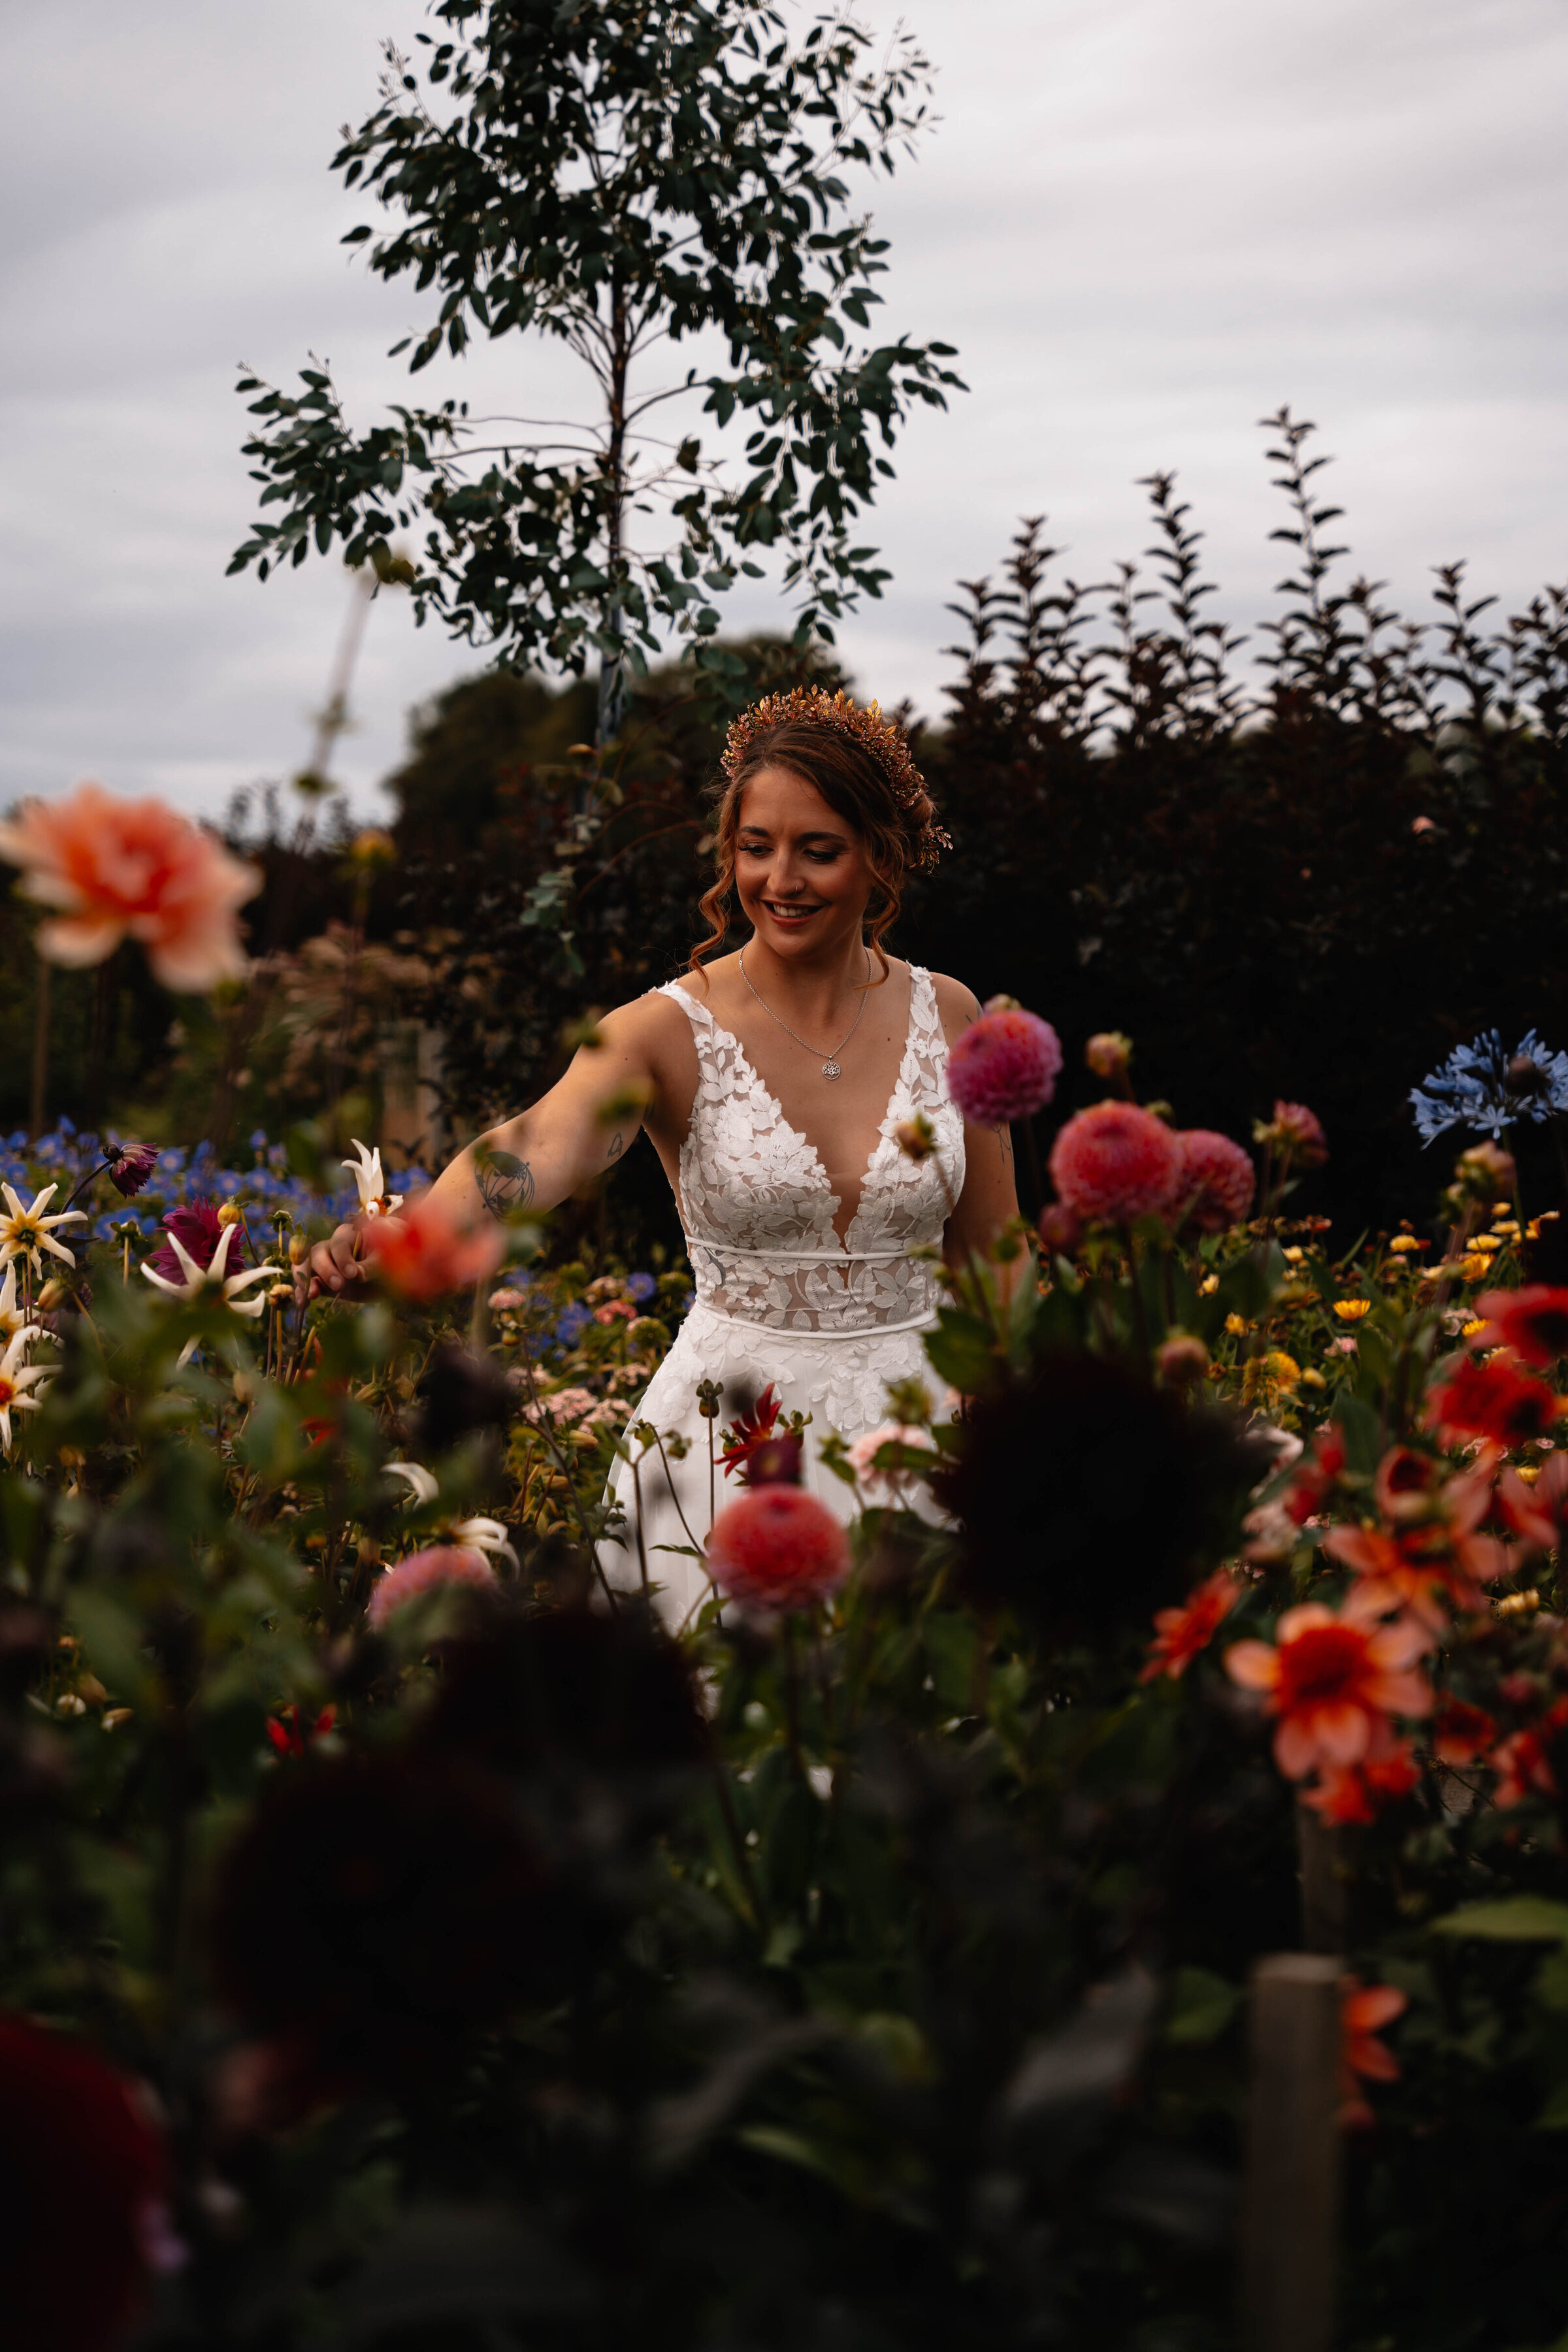 Bride in wedding dress surrounded by wildflowers